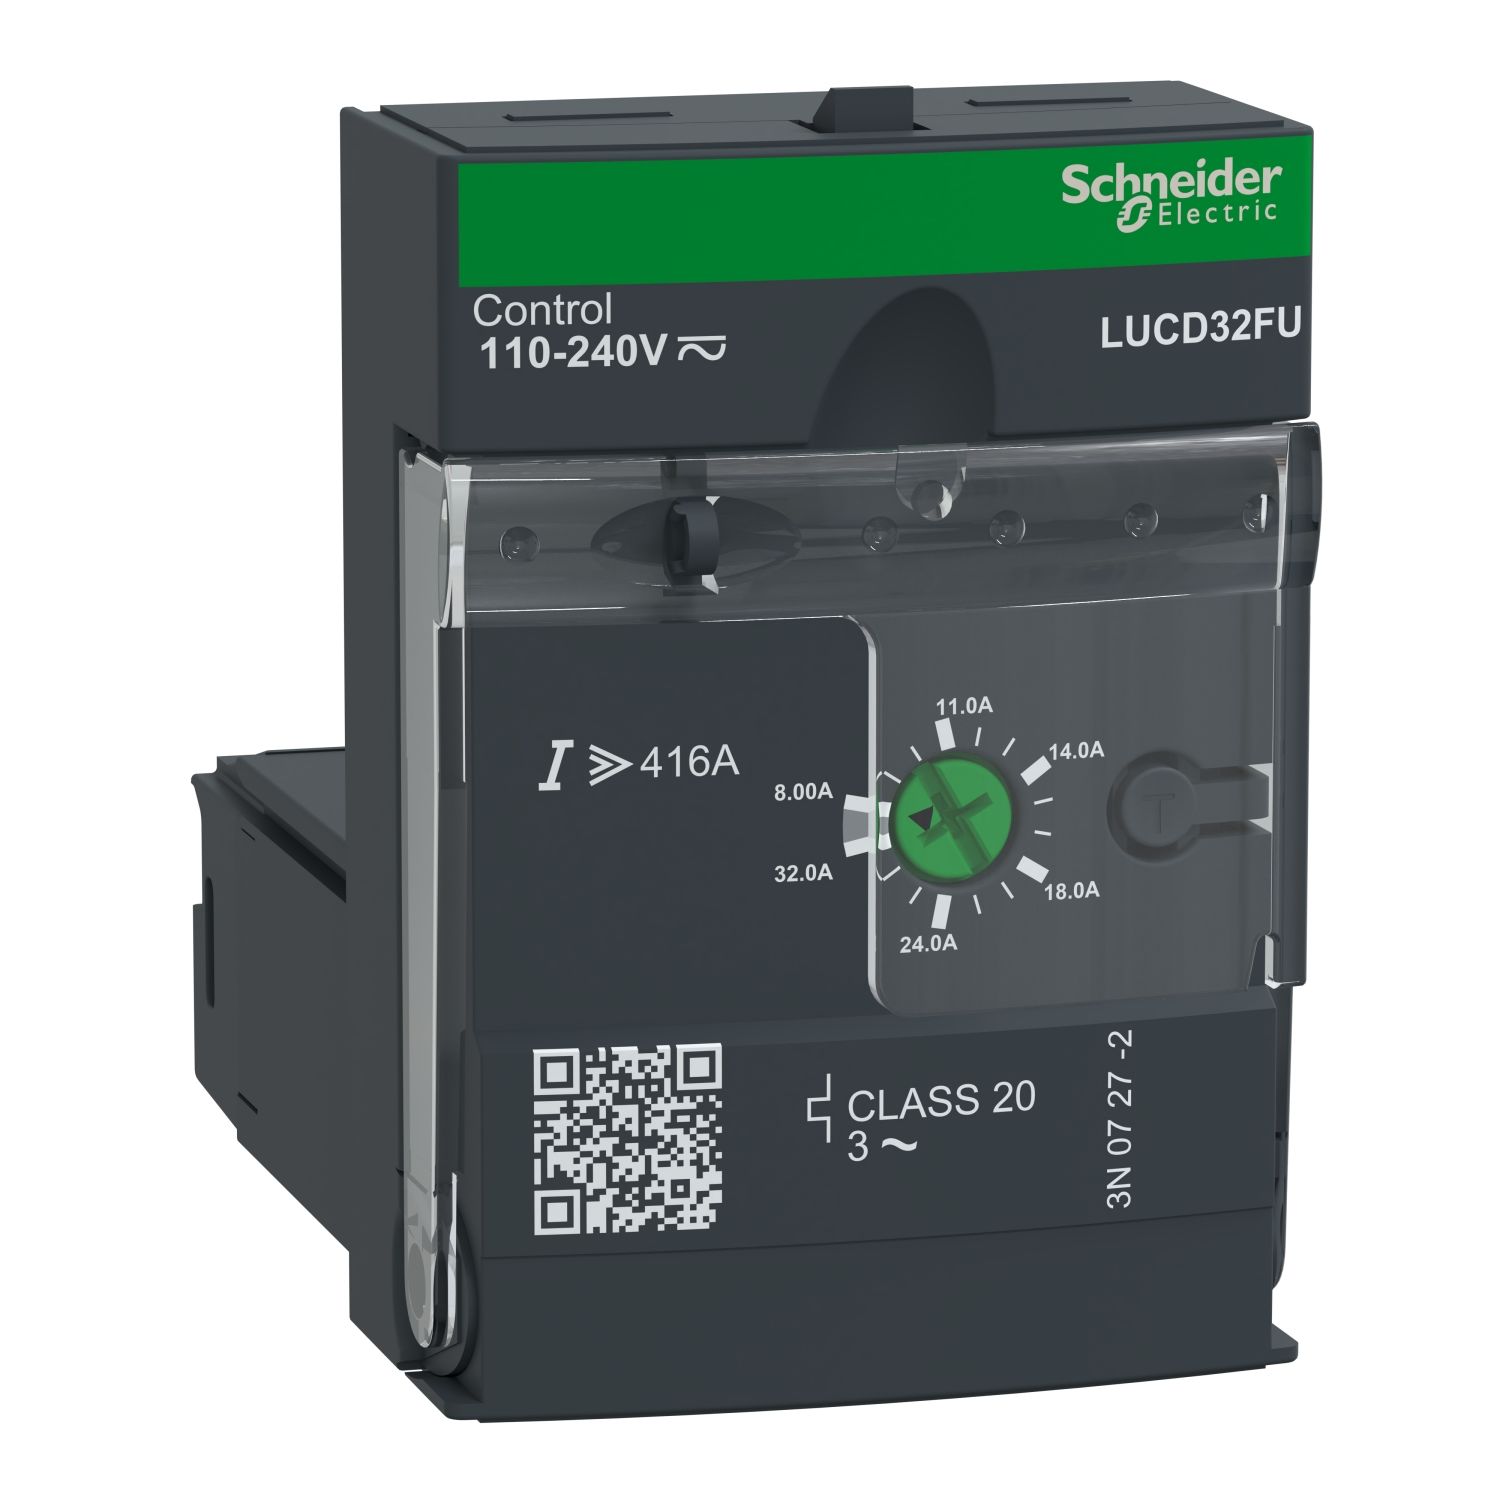 LUCD32FU Advanced control unit, TeSys Ultra, 3P, 8 to 32A, 690VAC, protection & diagnostic, class 20, 110 to 240VAC/DC coil